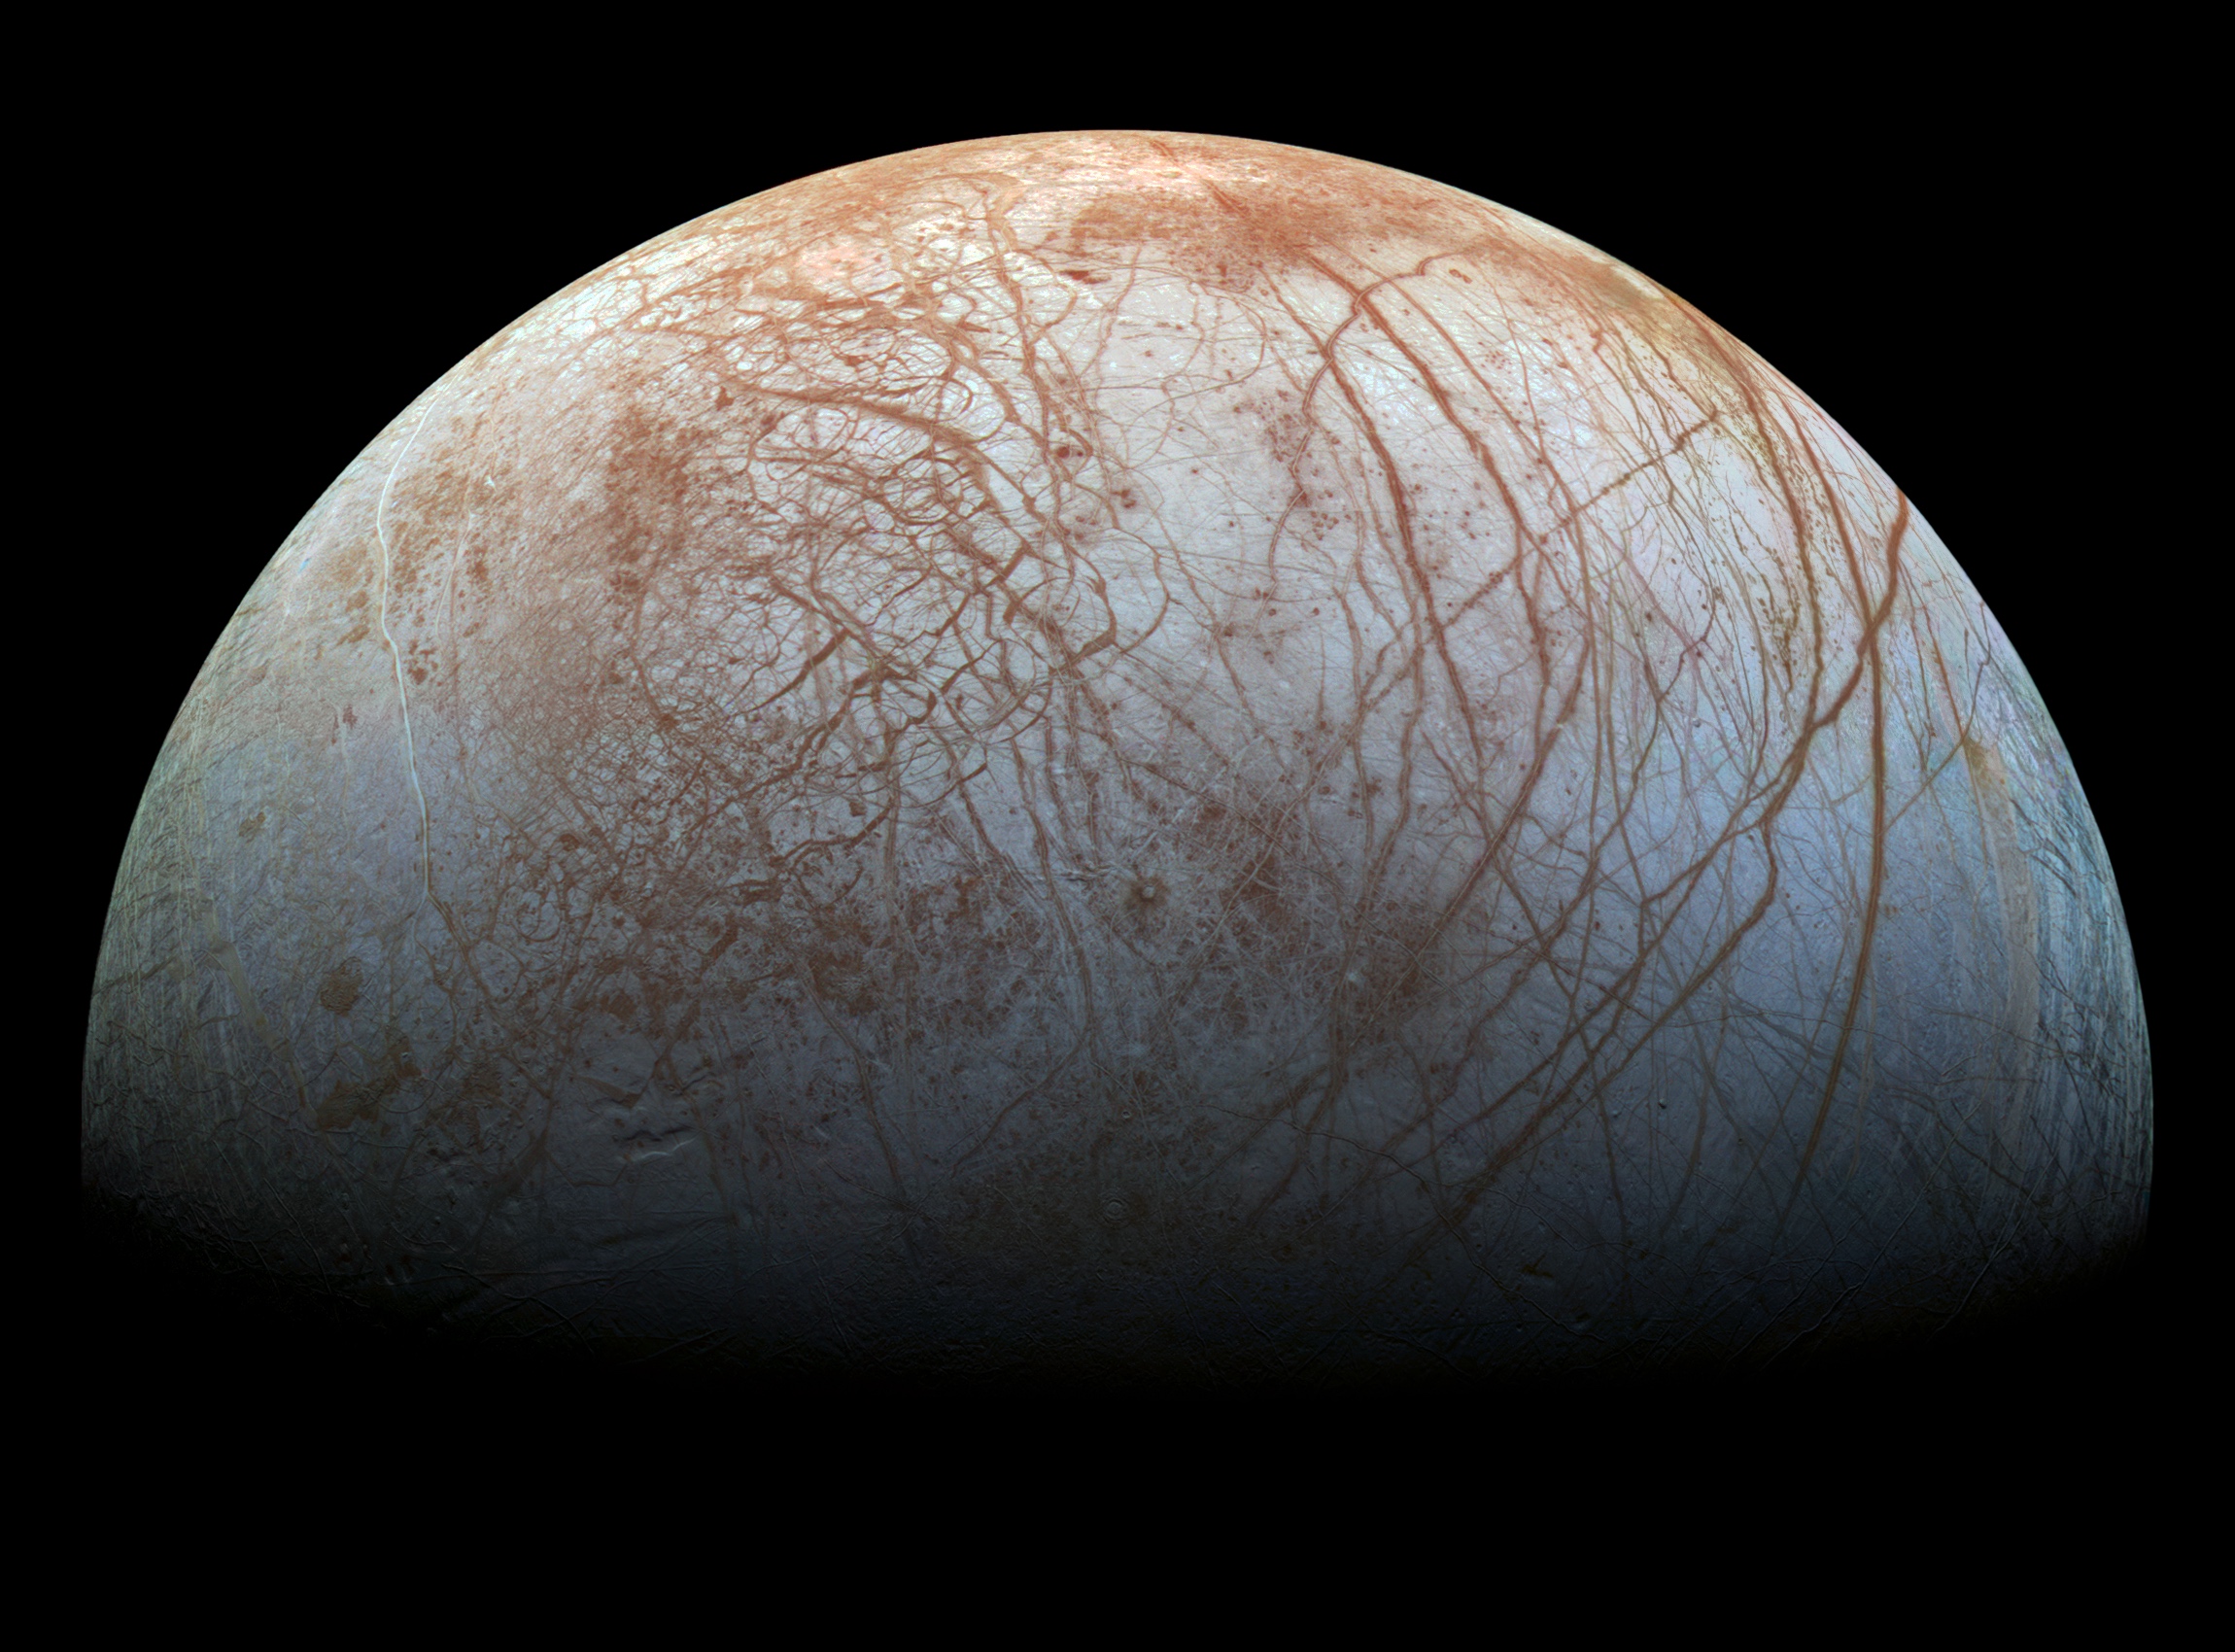 Surface of Jupiter's icy moon Europa made from images taken by NASA's Galileo spacecraft in the late 1990s.